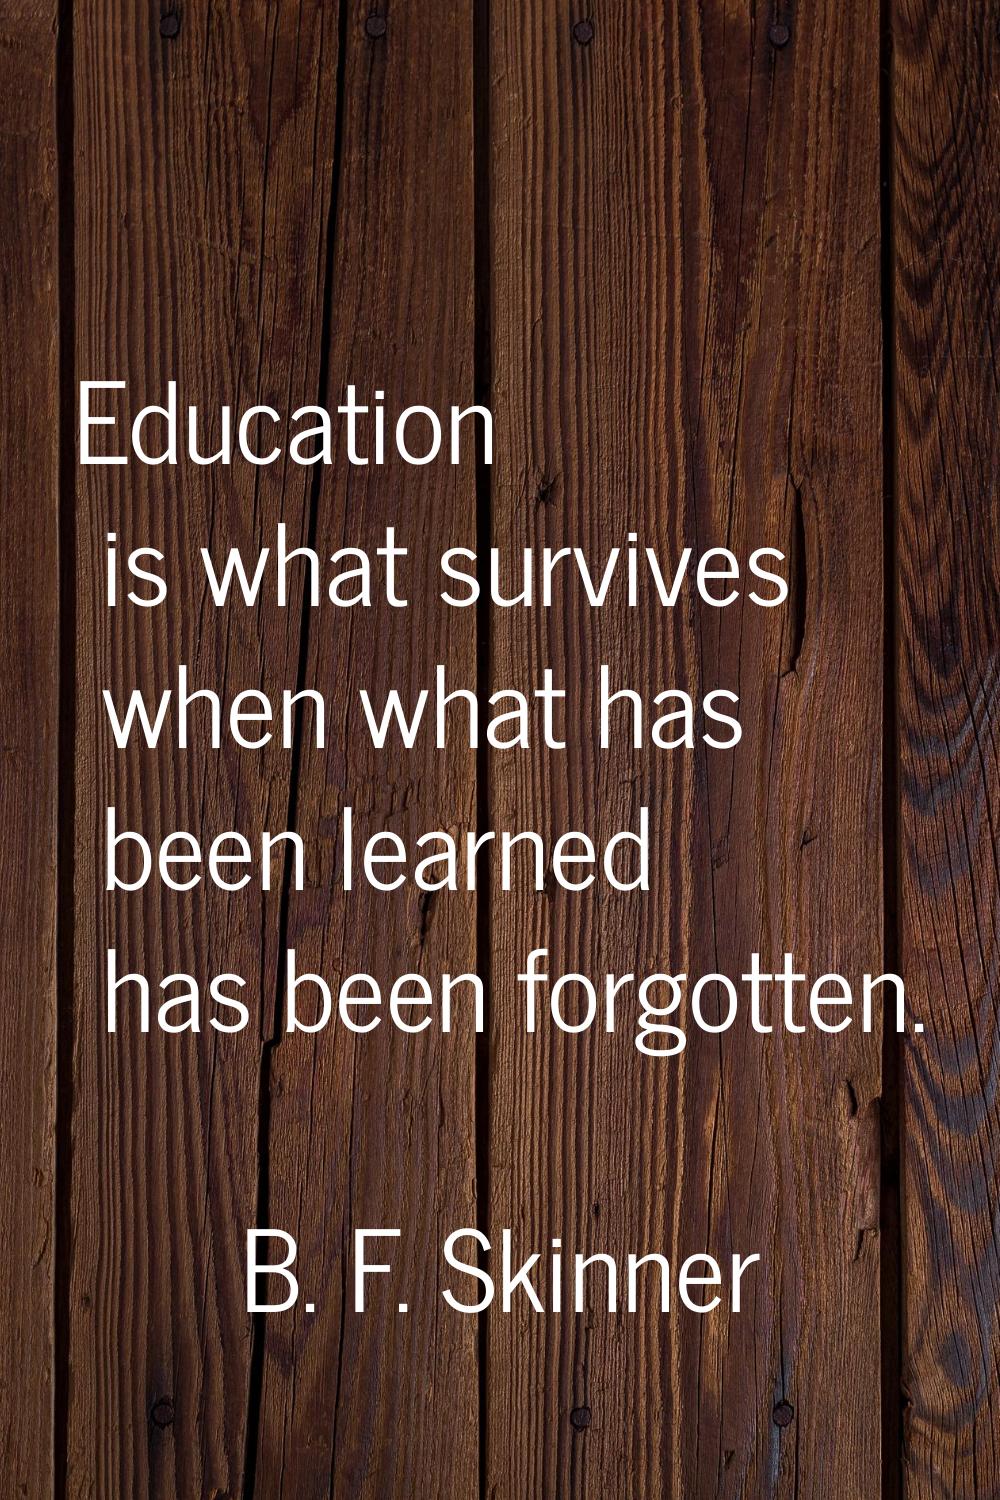 Education is what survives when what has been learned has been forgotten.